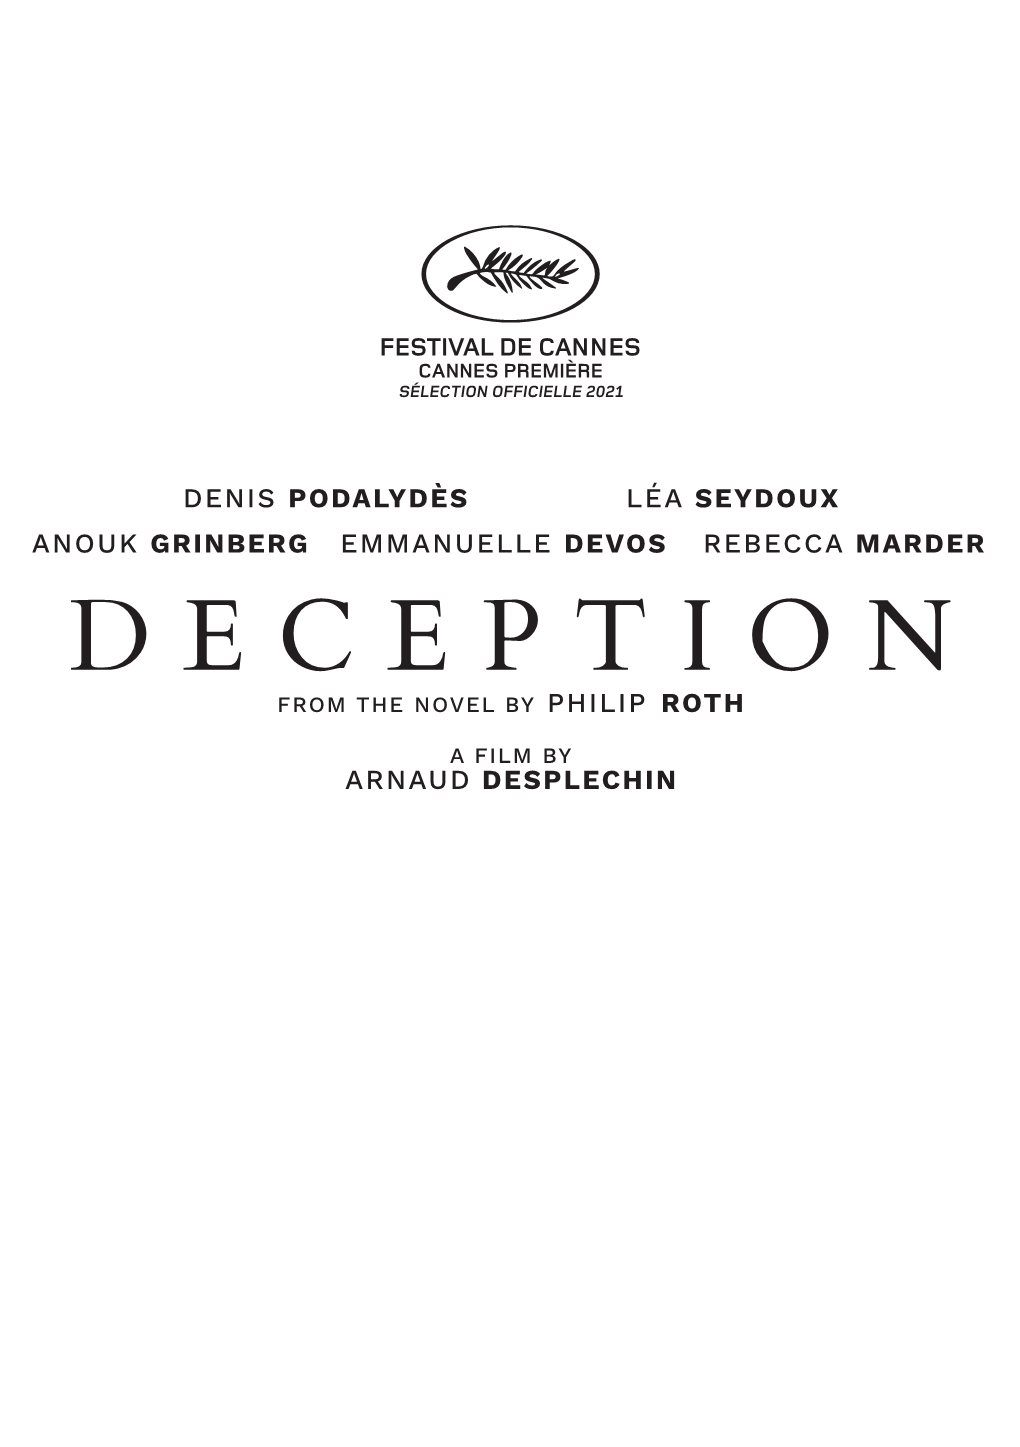 Emmanuelle Devos Rebecca Marder Deception from the Novel by Philip Roth a Film by Arnaud Desplechin Why Not Productions Present